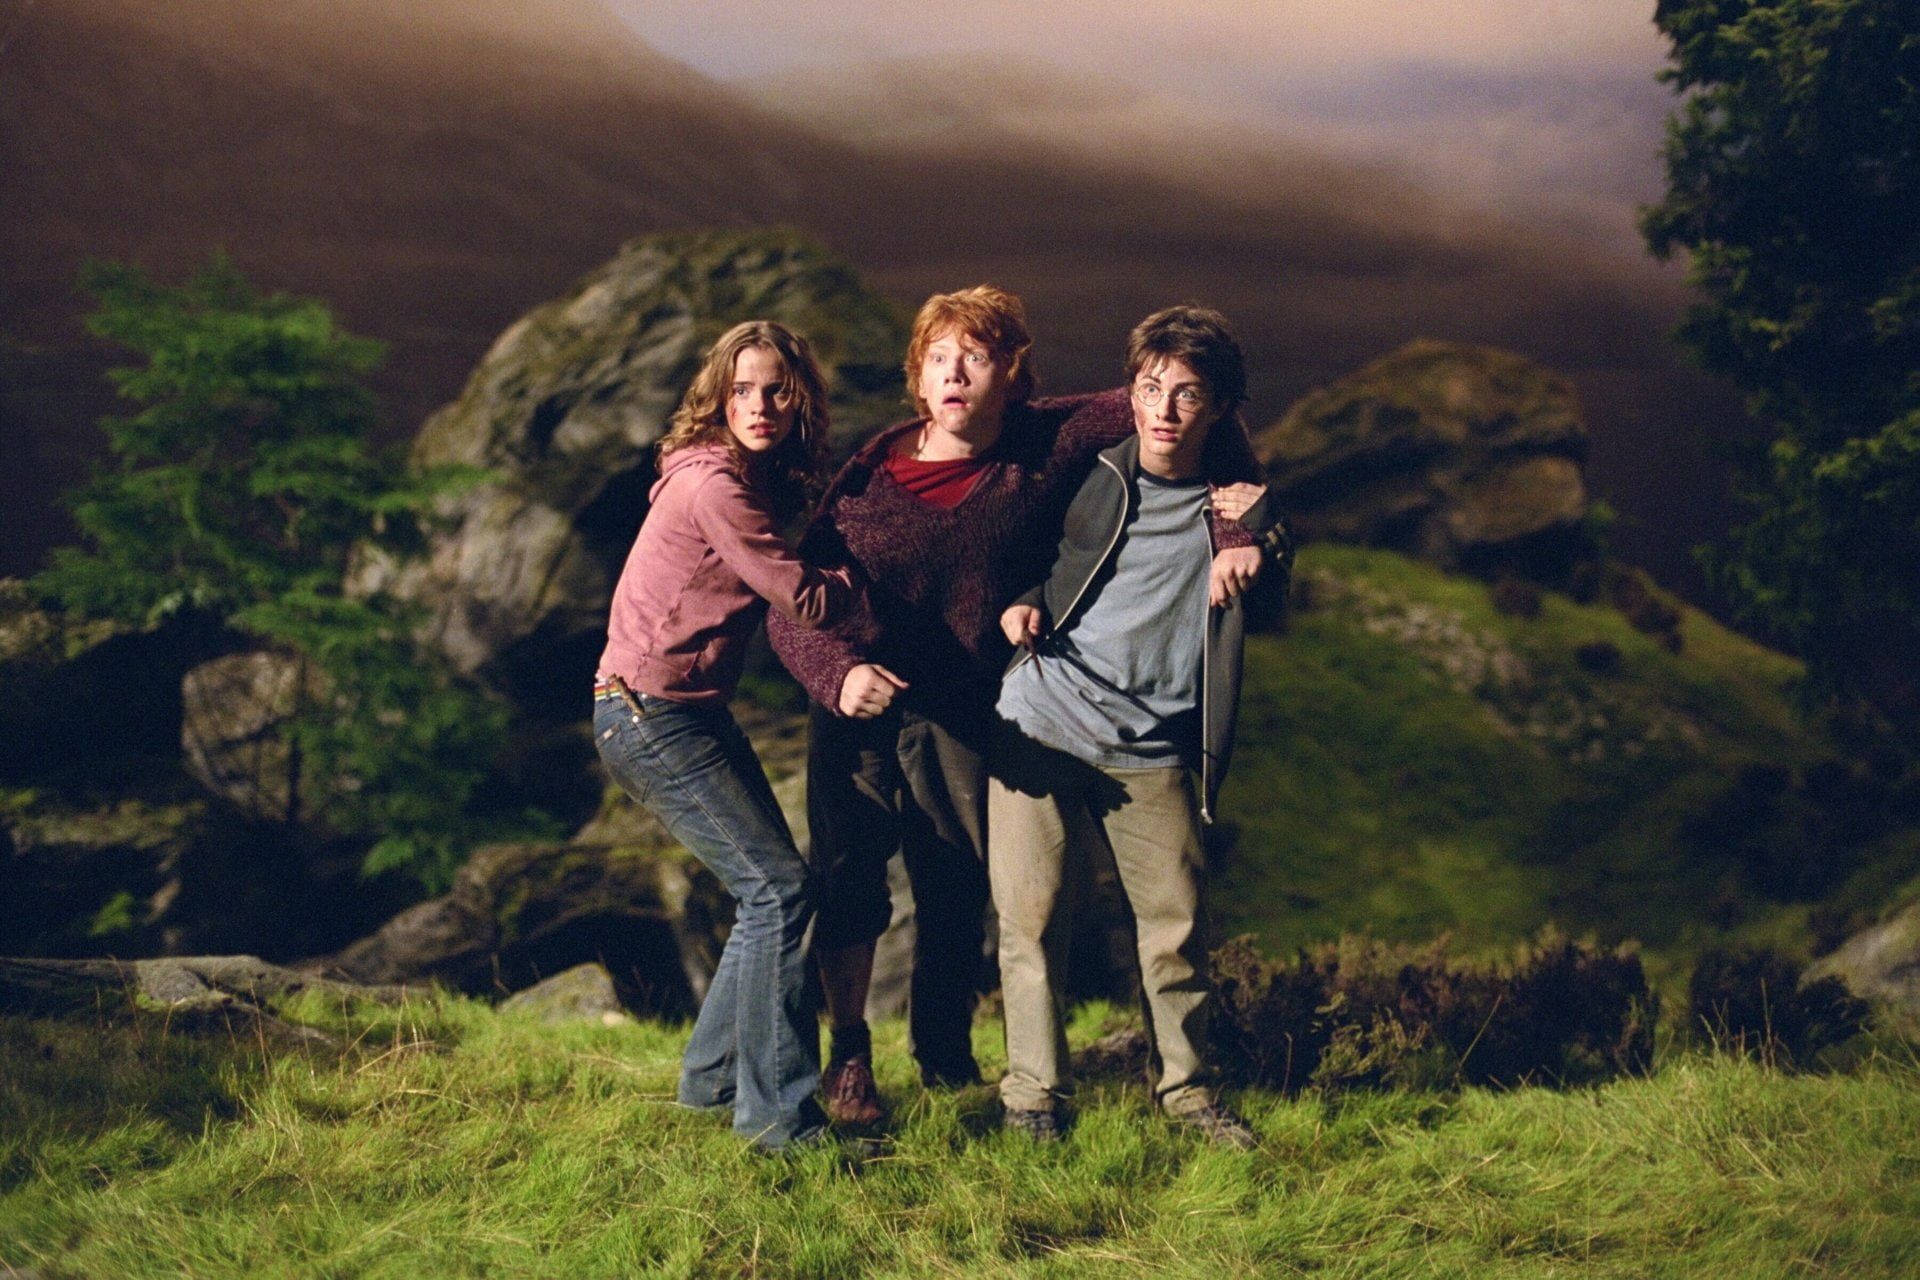 Image Ron Weasley On The Search For The Deathly Hallows